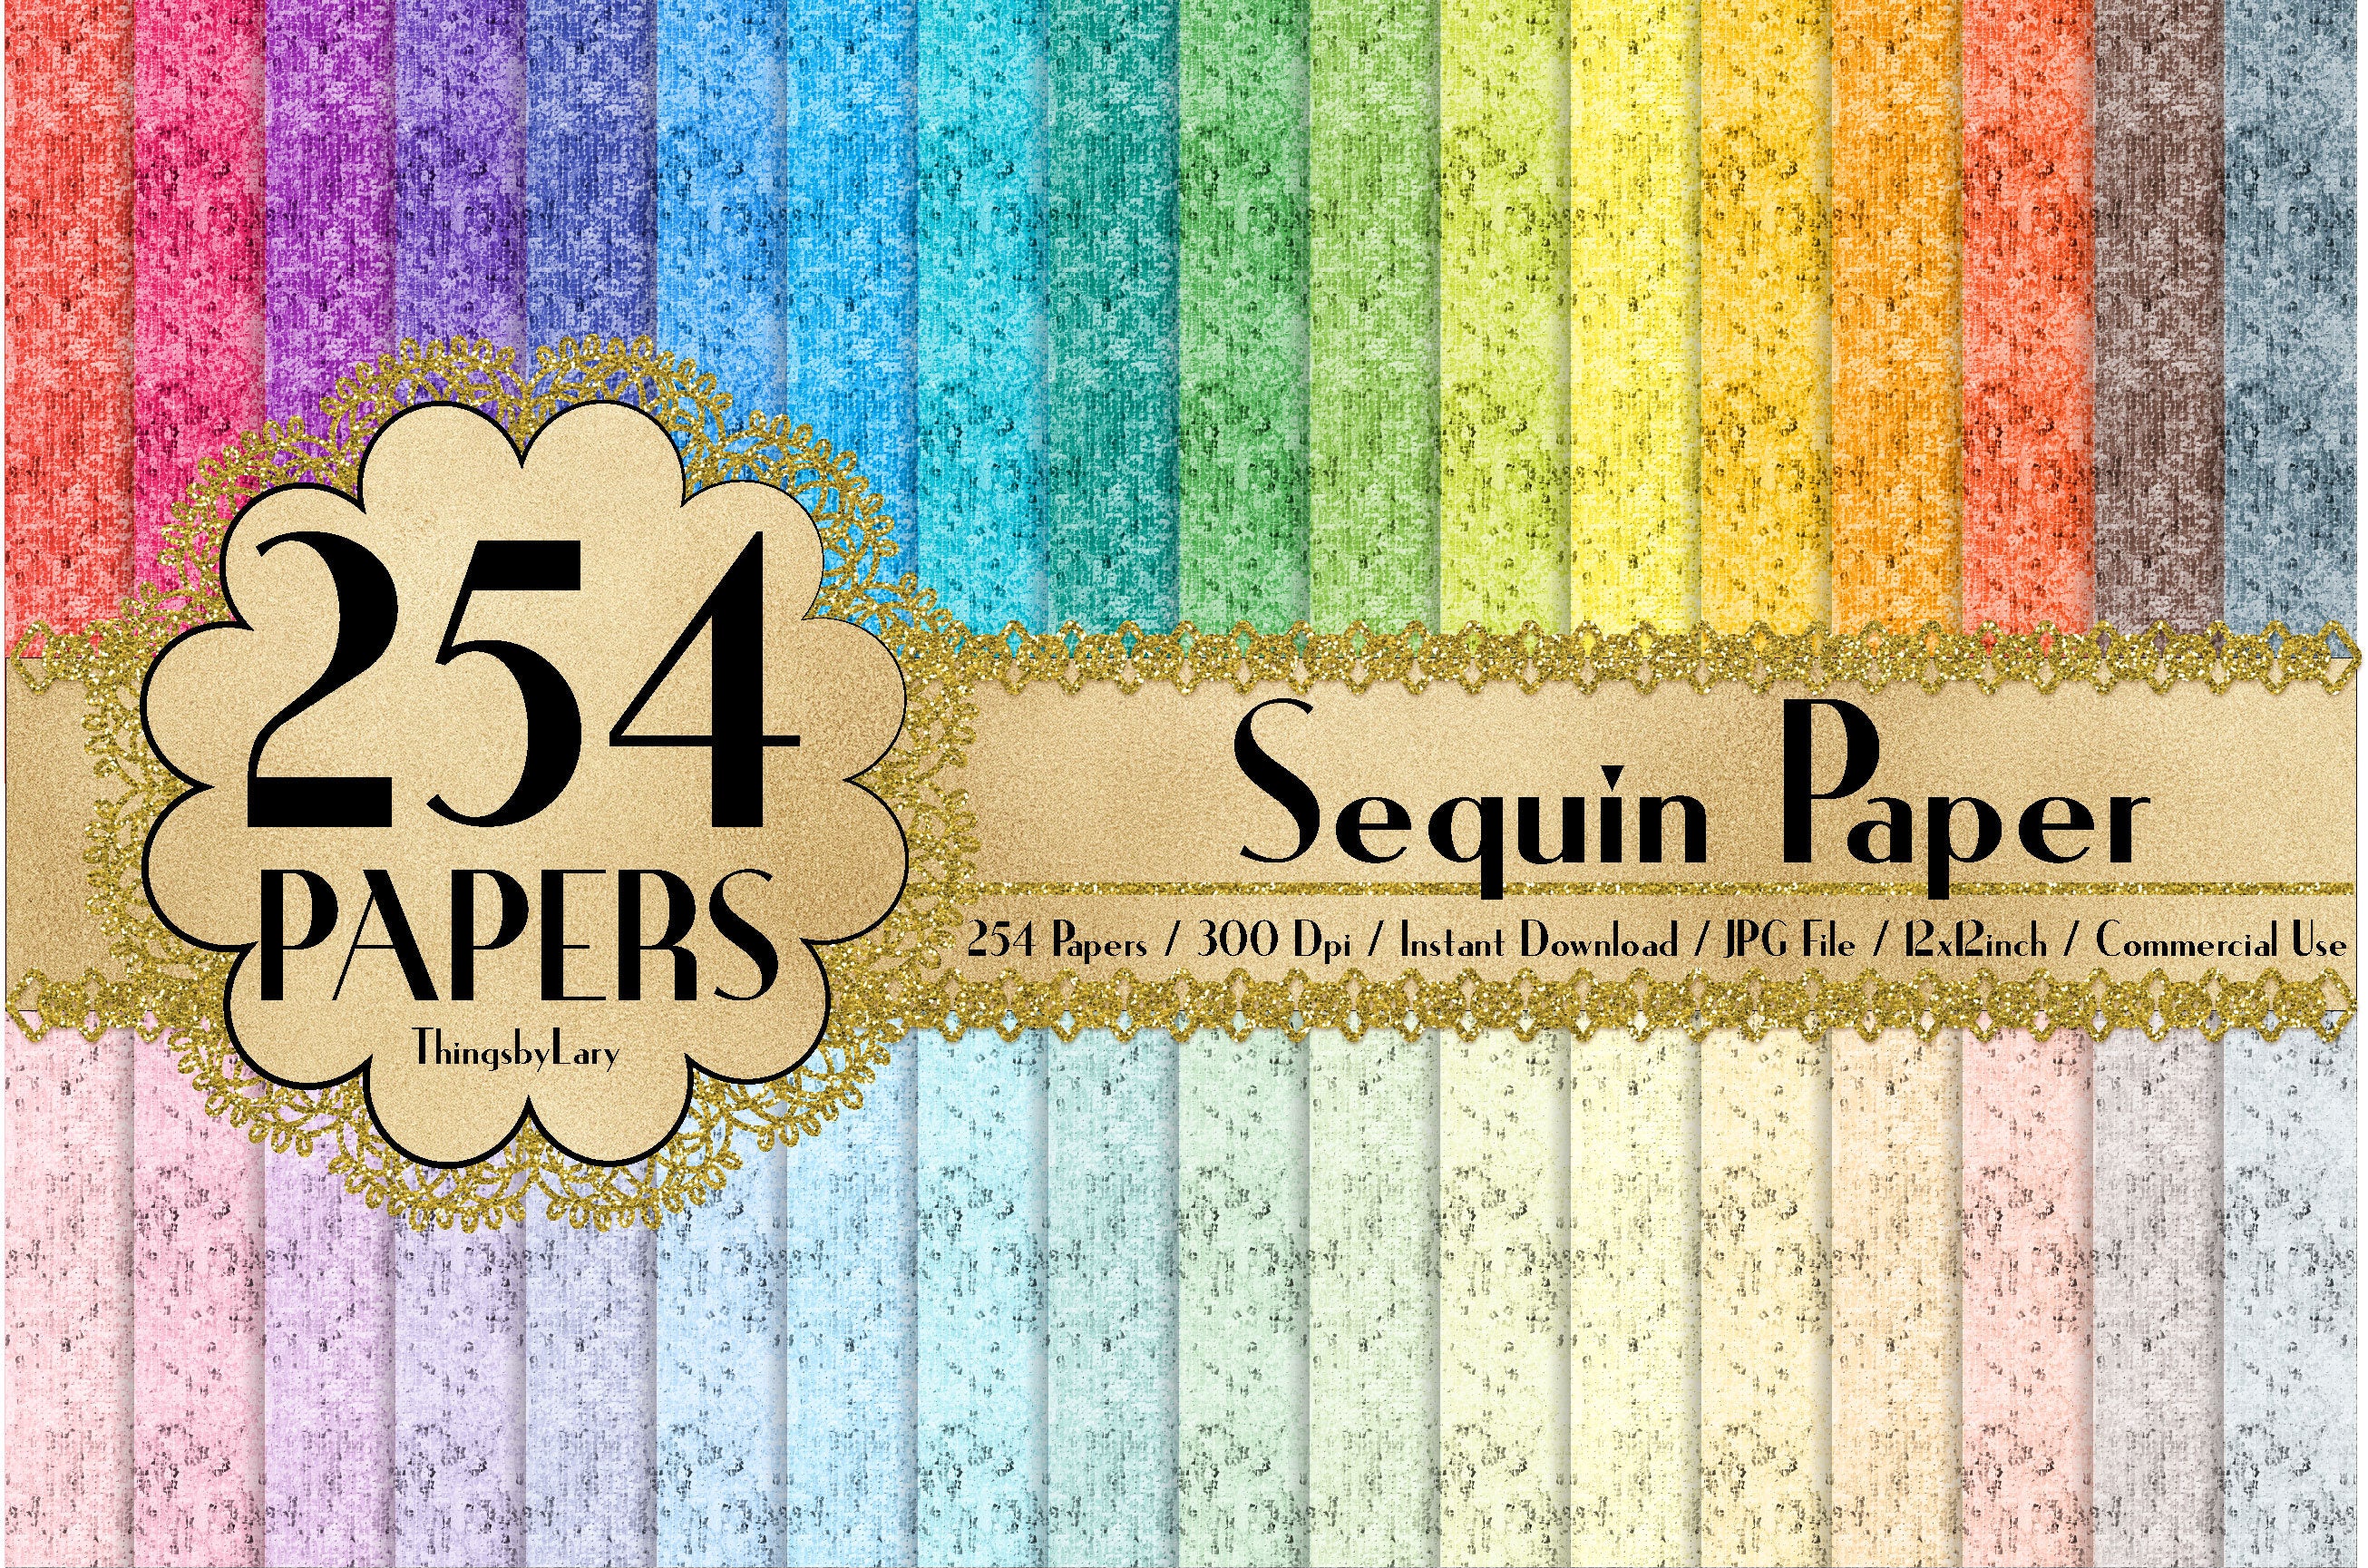 254 Sequin Texture Papers 12 inch 300 Dpi Instant Download, Commercial Use, Over 100 Color Kit, Scrapbooking Sequin Kit, Sequin Pattern